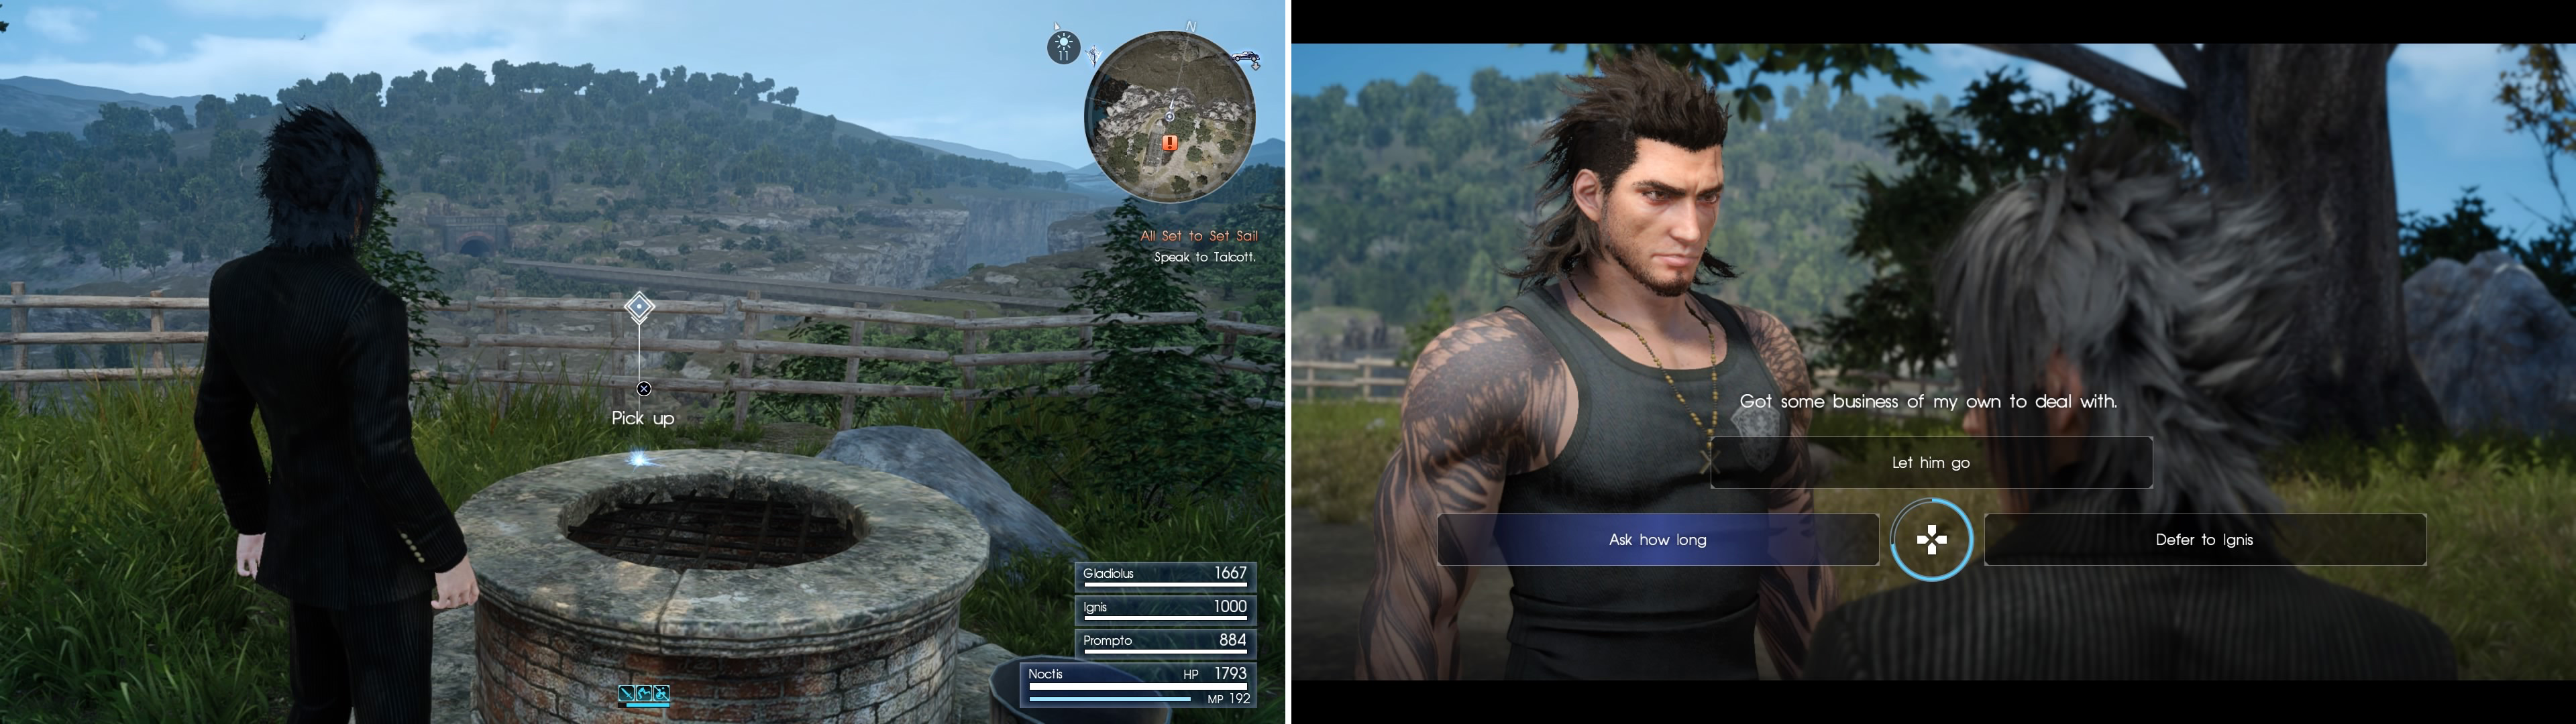 Pick up the Glass Gemstone at the well (left) before speaking with Iris. Gladio will set off alone and you can respond however you wish (right).